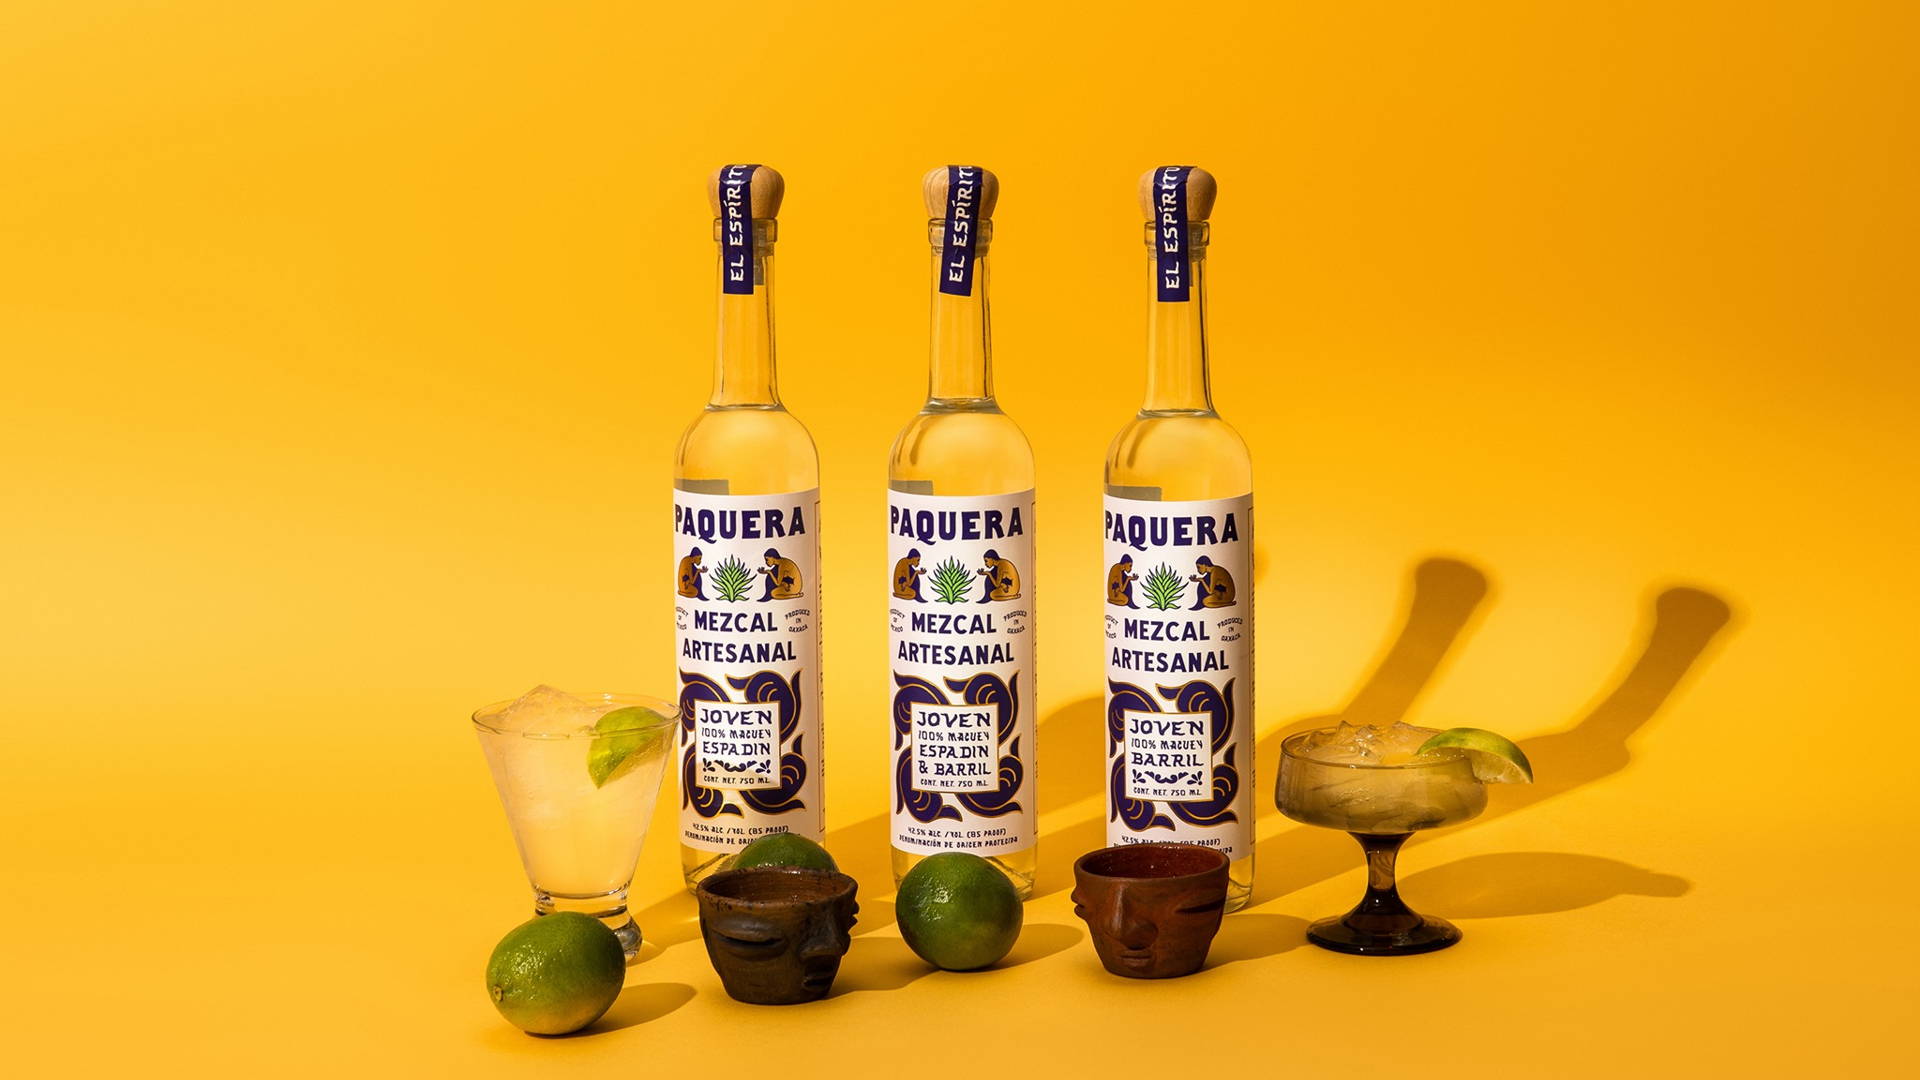 Paquera Mezcal's Packaging Design Is Reflective Of Mexican Culture And ...